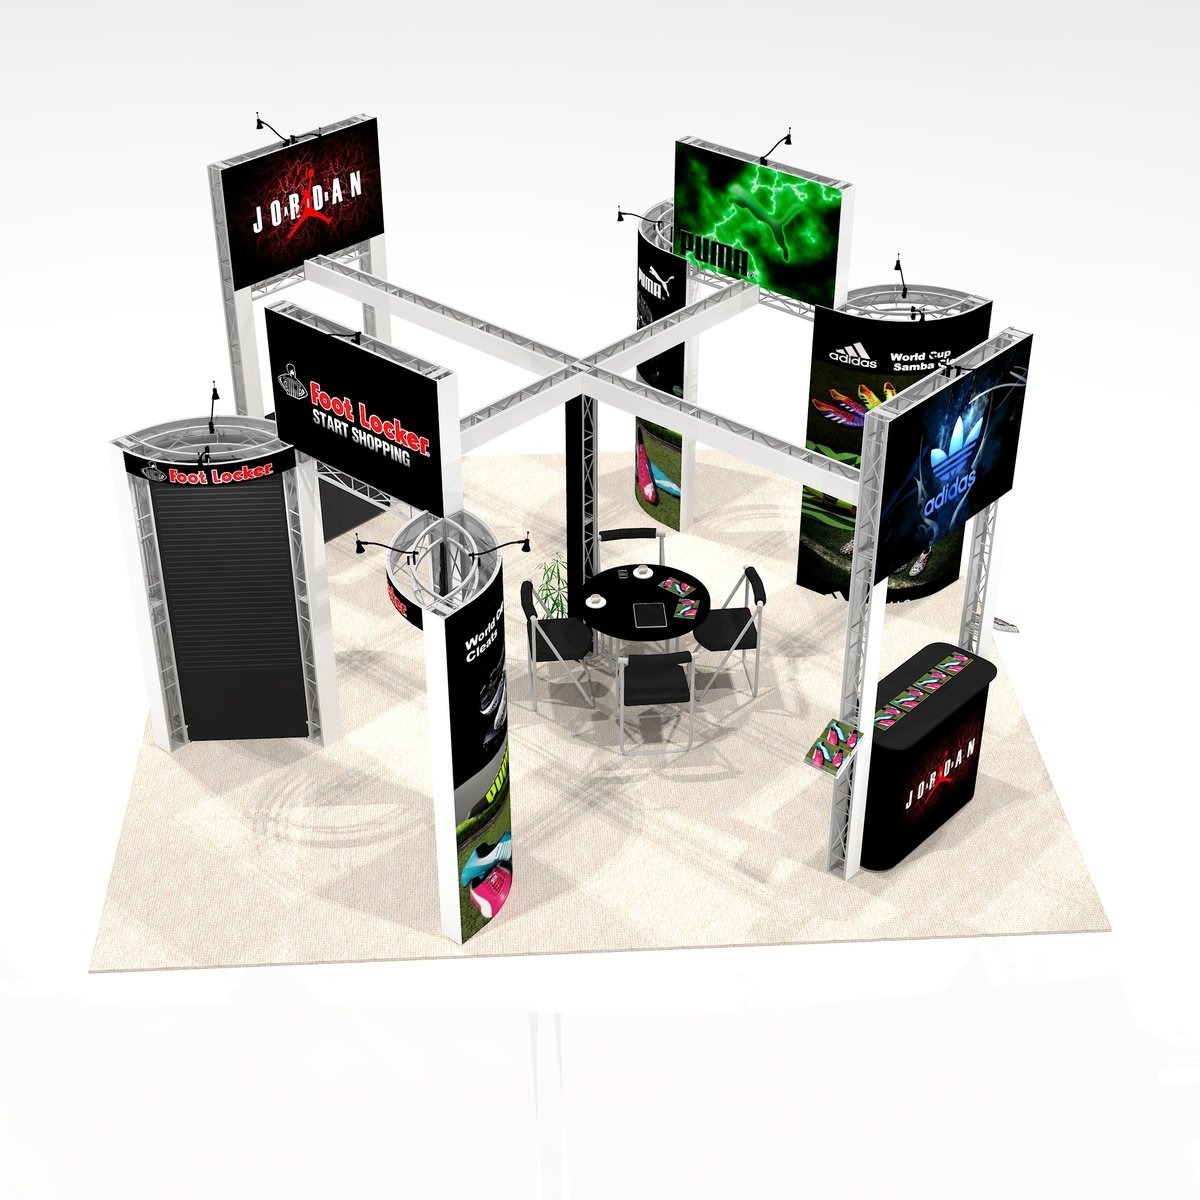 Island trade show exhibit design FRA2020 Graphic Package B